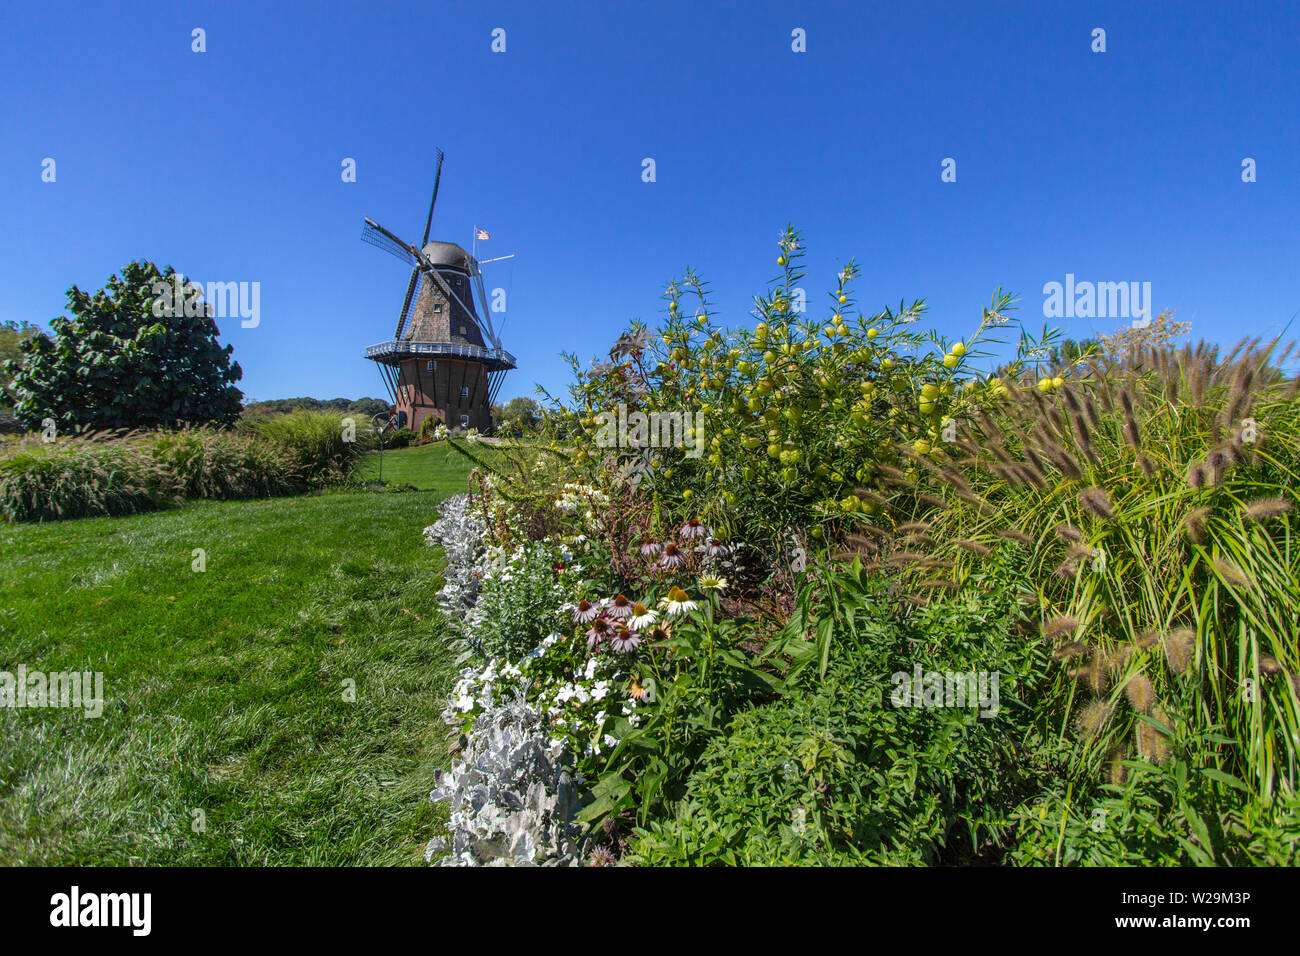 The oldest working authentic Dutch windmill in America is located in Holland, Michigan It is the centerpiece Tulip Time Festival which draws thousands. Stock Photo